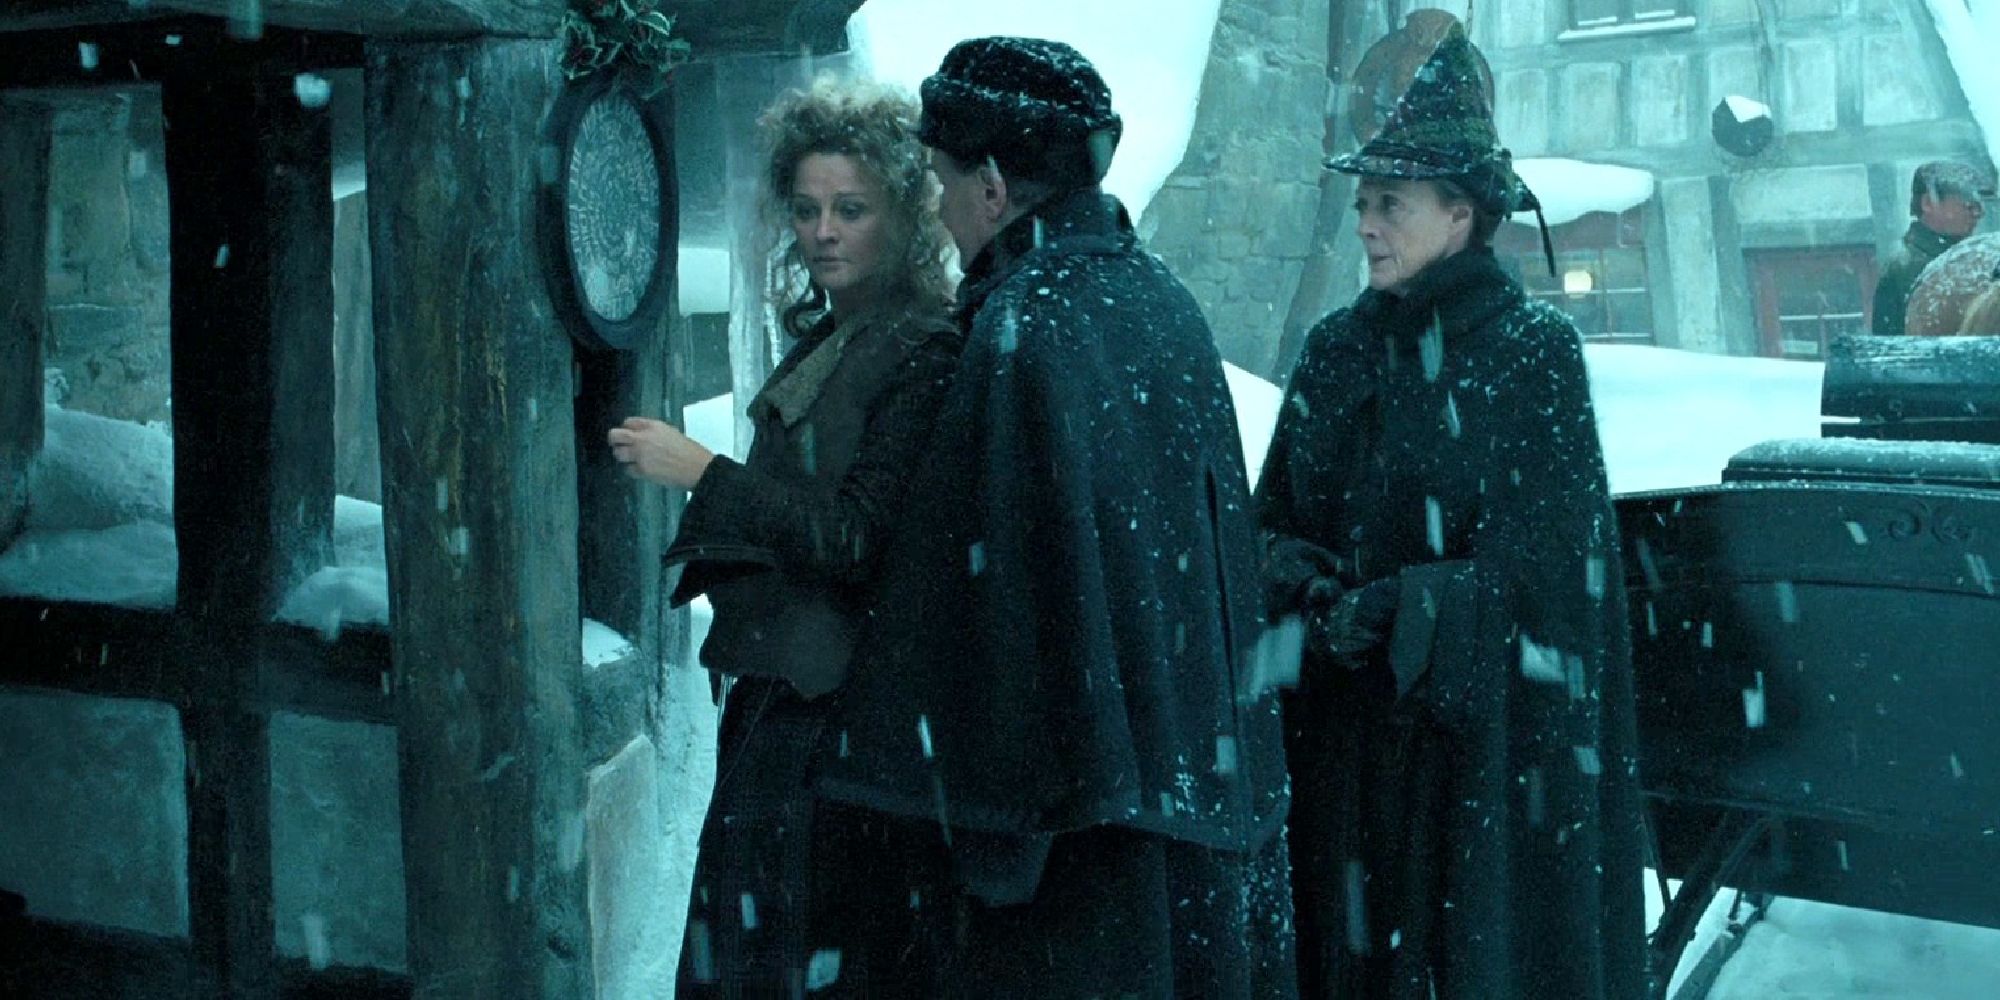 McGonagall entering a pub in Hogsmeade with two other wizards in Prisoner of Azkaban